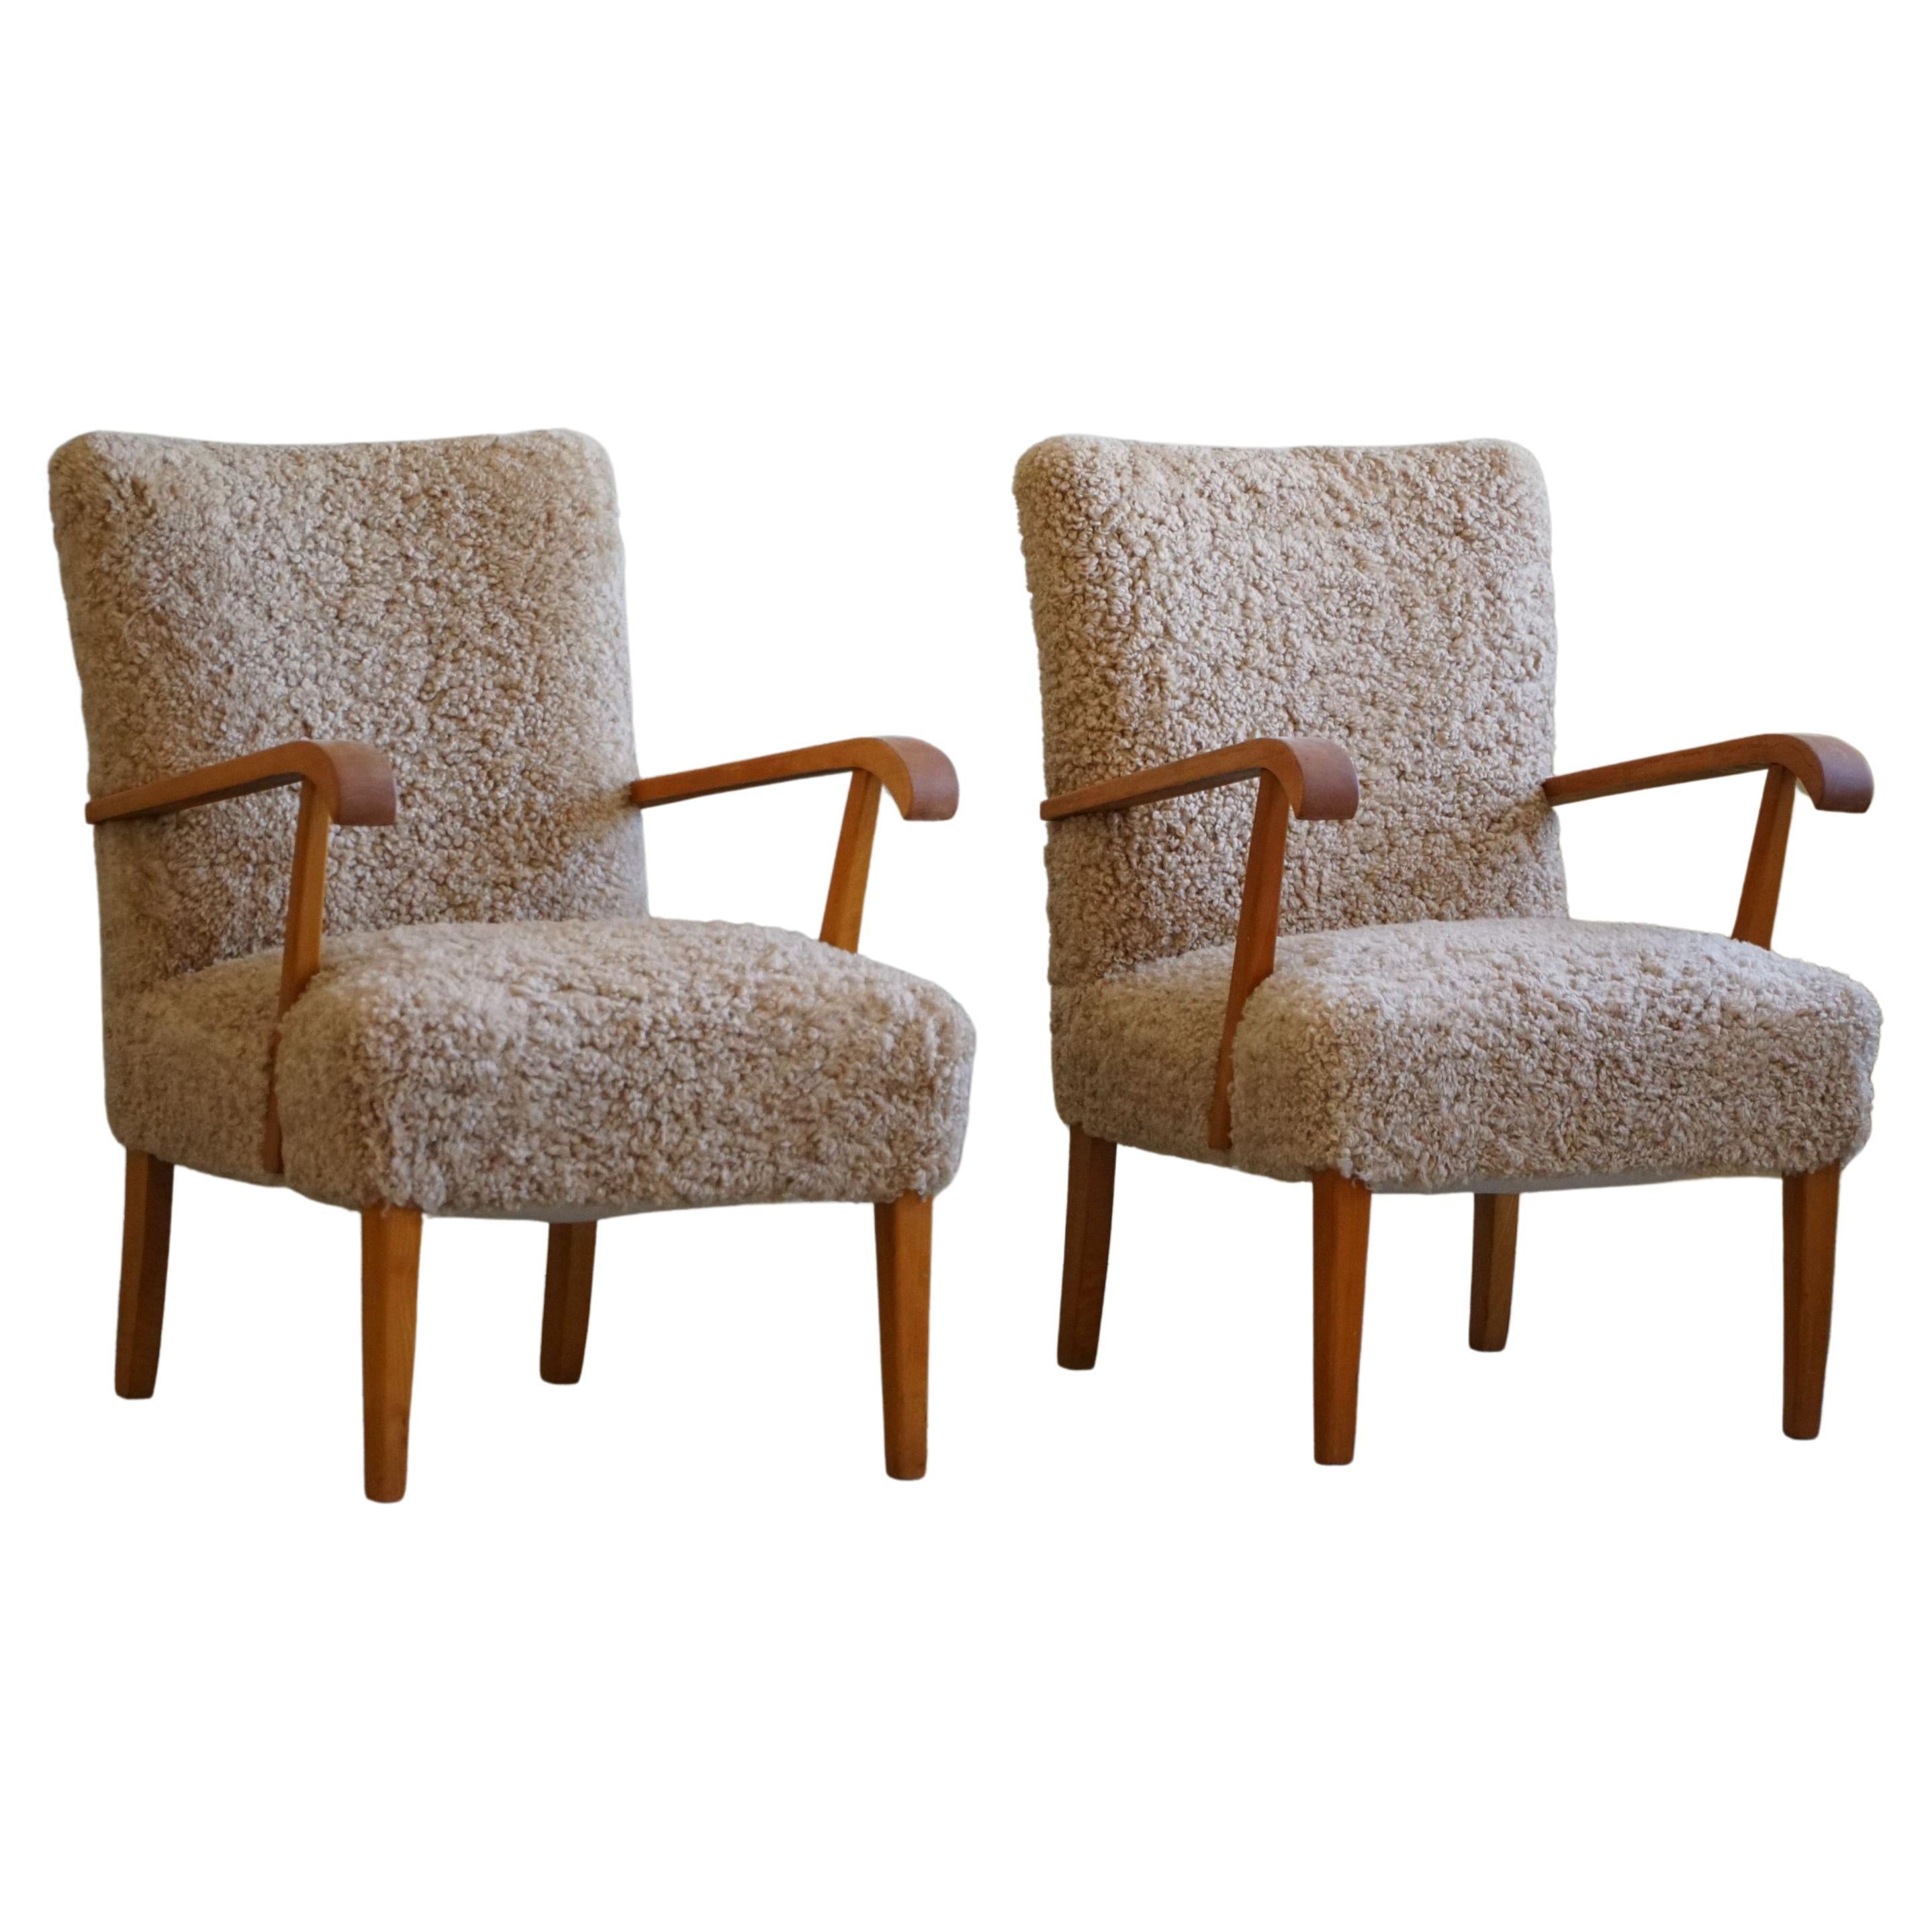 Pair of Danish Mid Century Modern Lounge Chairs in Beech & Lambswool, 1960s For Sale